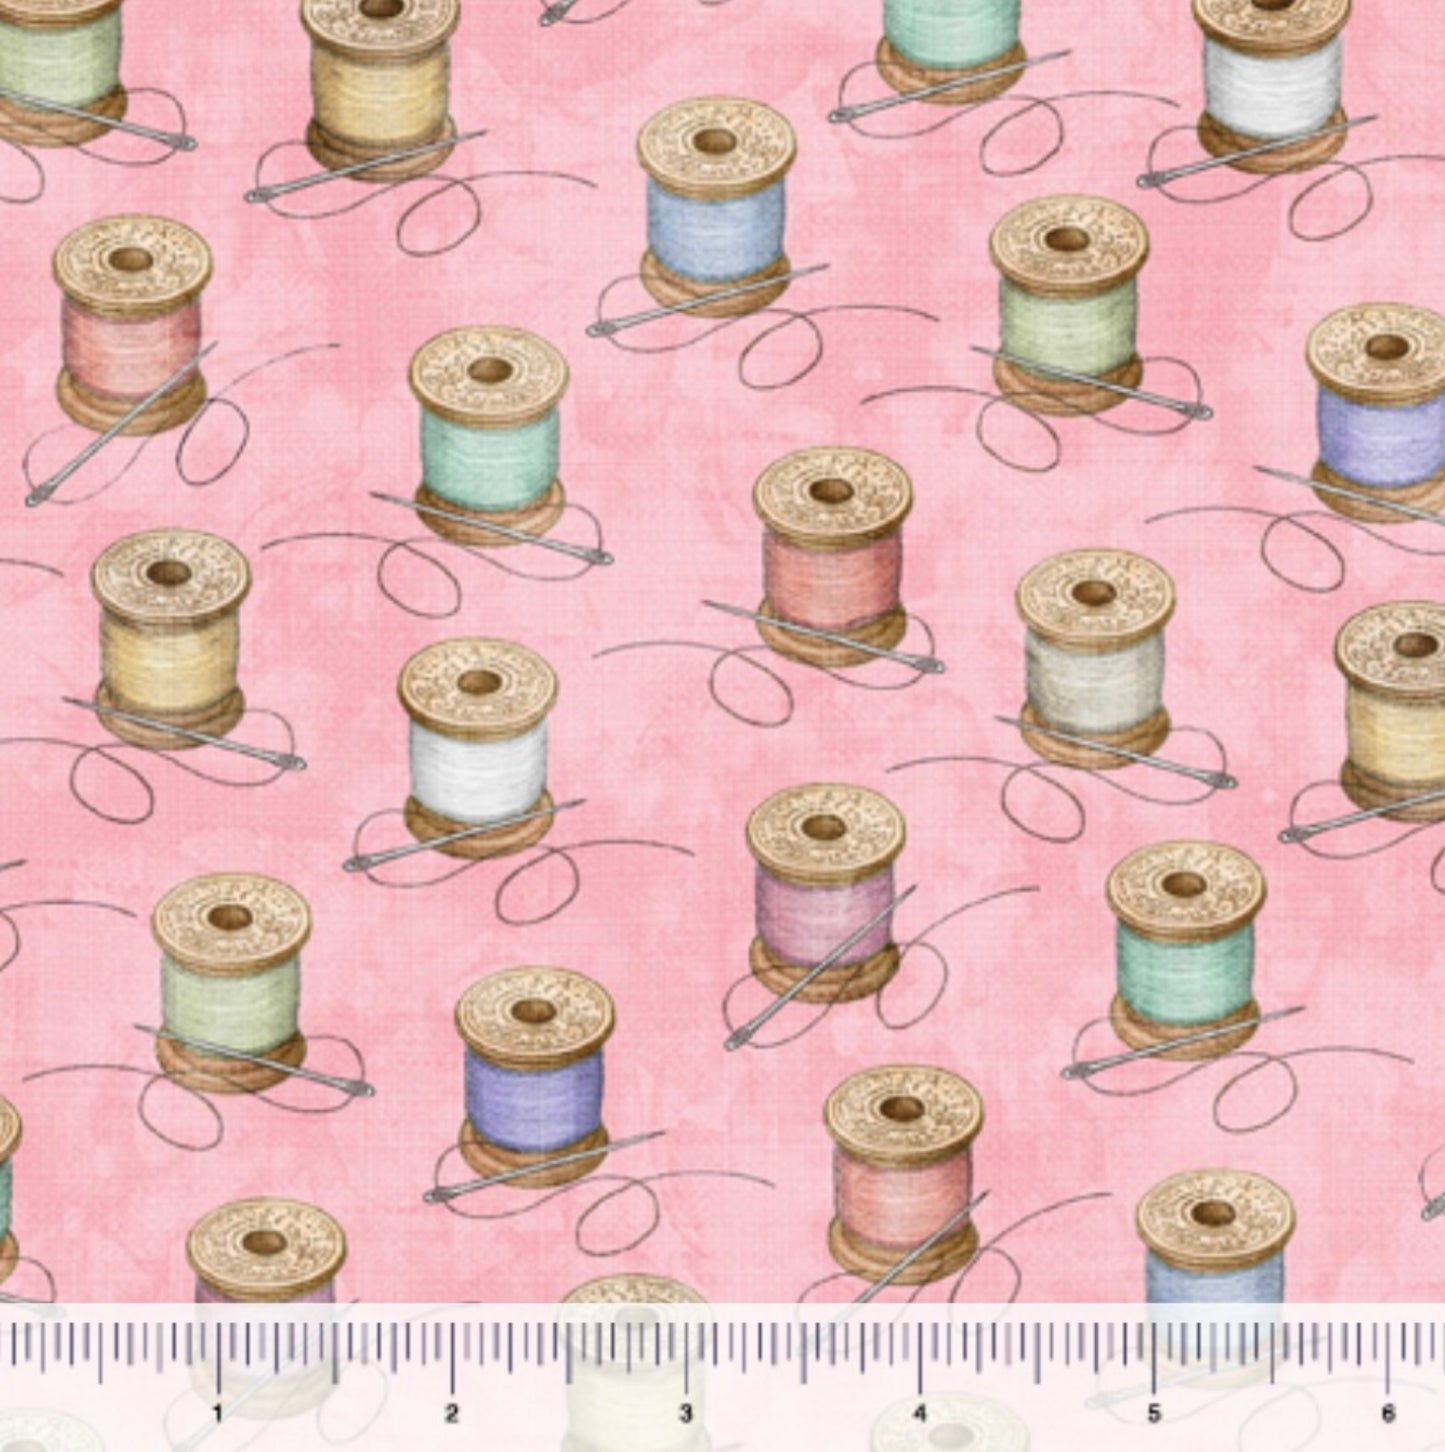 Spools - Just Sew Collection by Dan Morris for QTFabrics - Pink - 29230-P